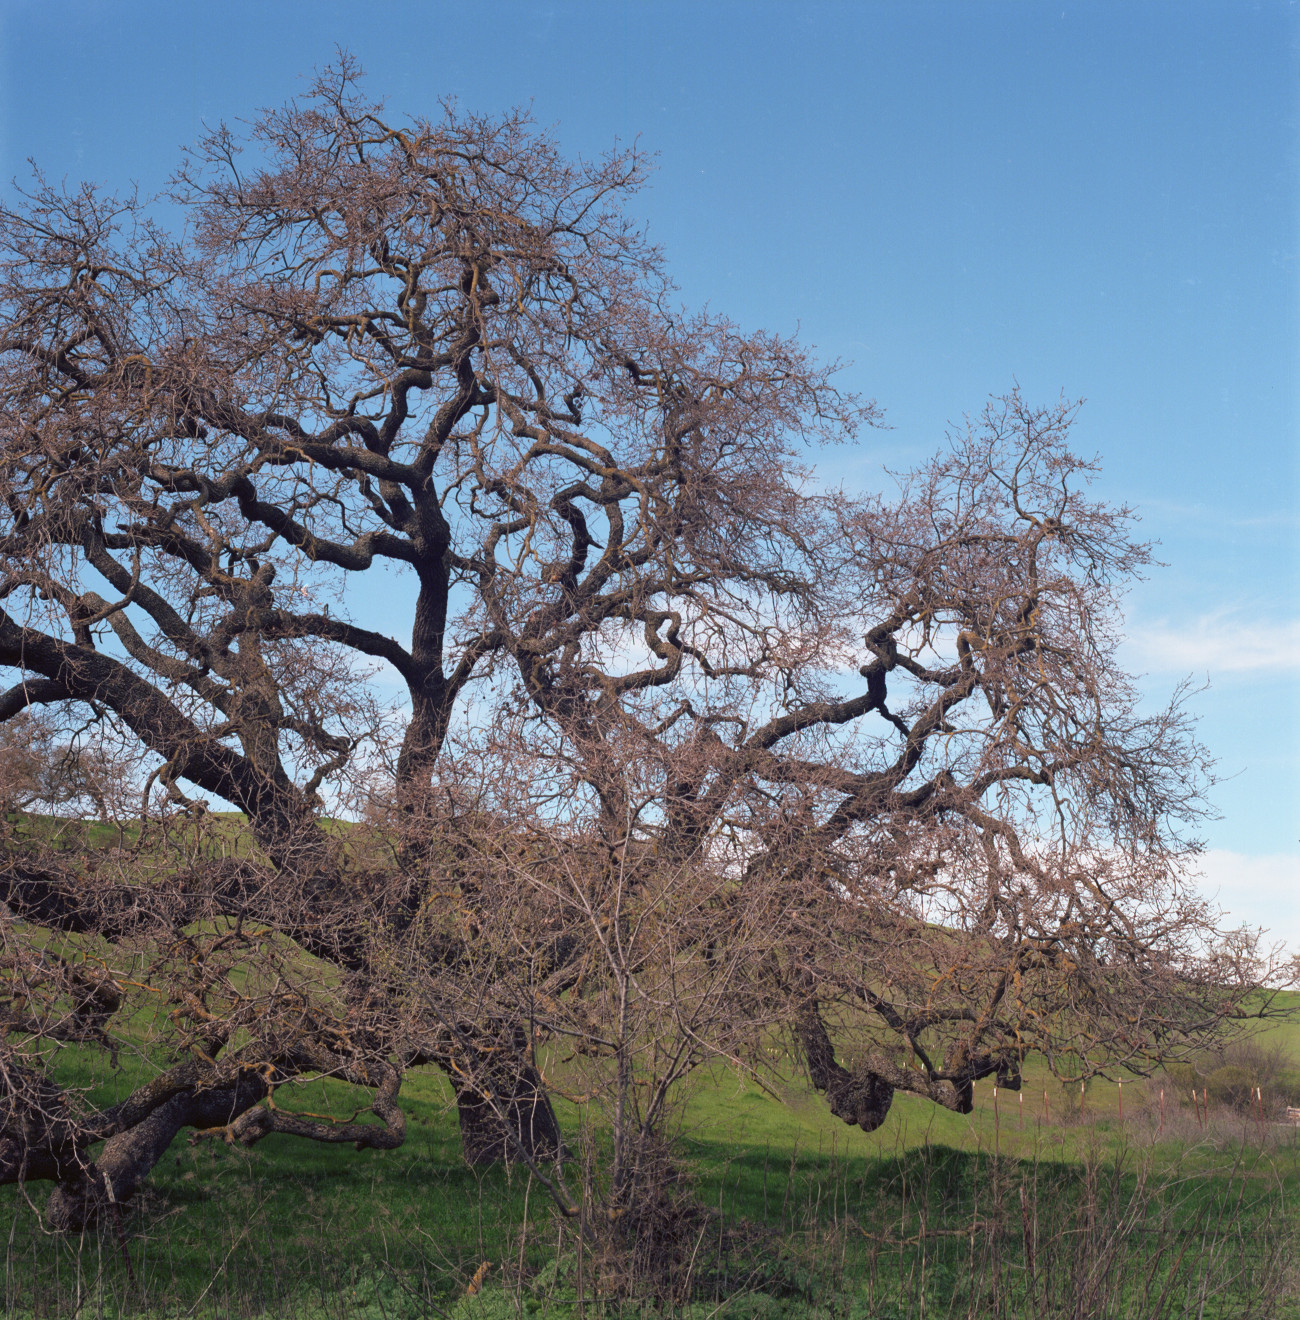 Oak standing along Bailey Avenue is all twists and turns of branches seeming to move even in its stillness. Pale blue sky and small soft white clouds provide the background.